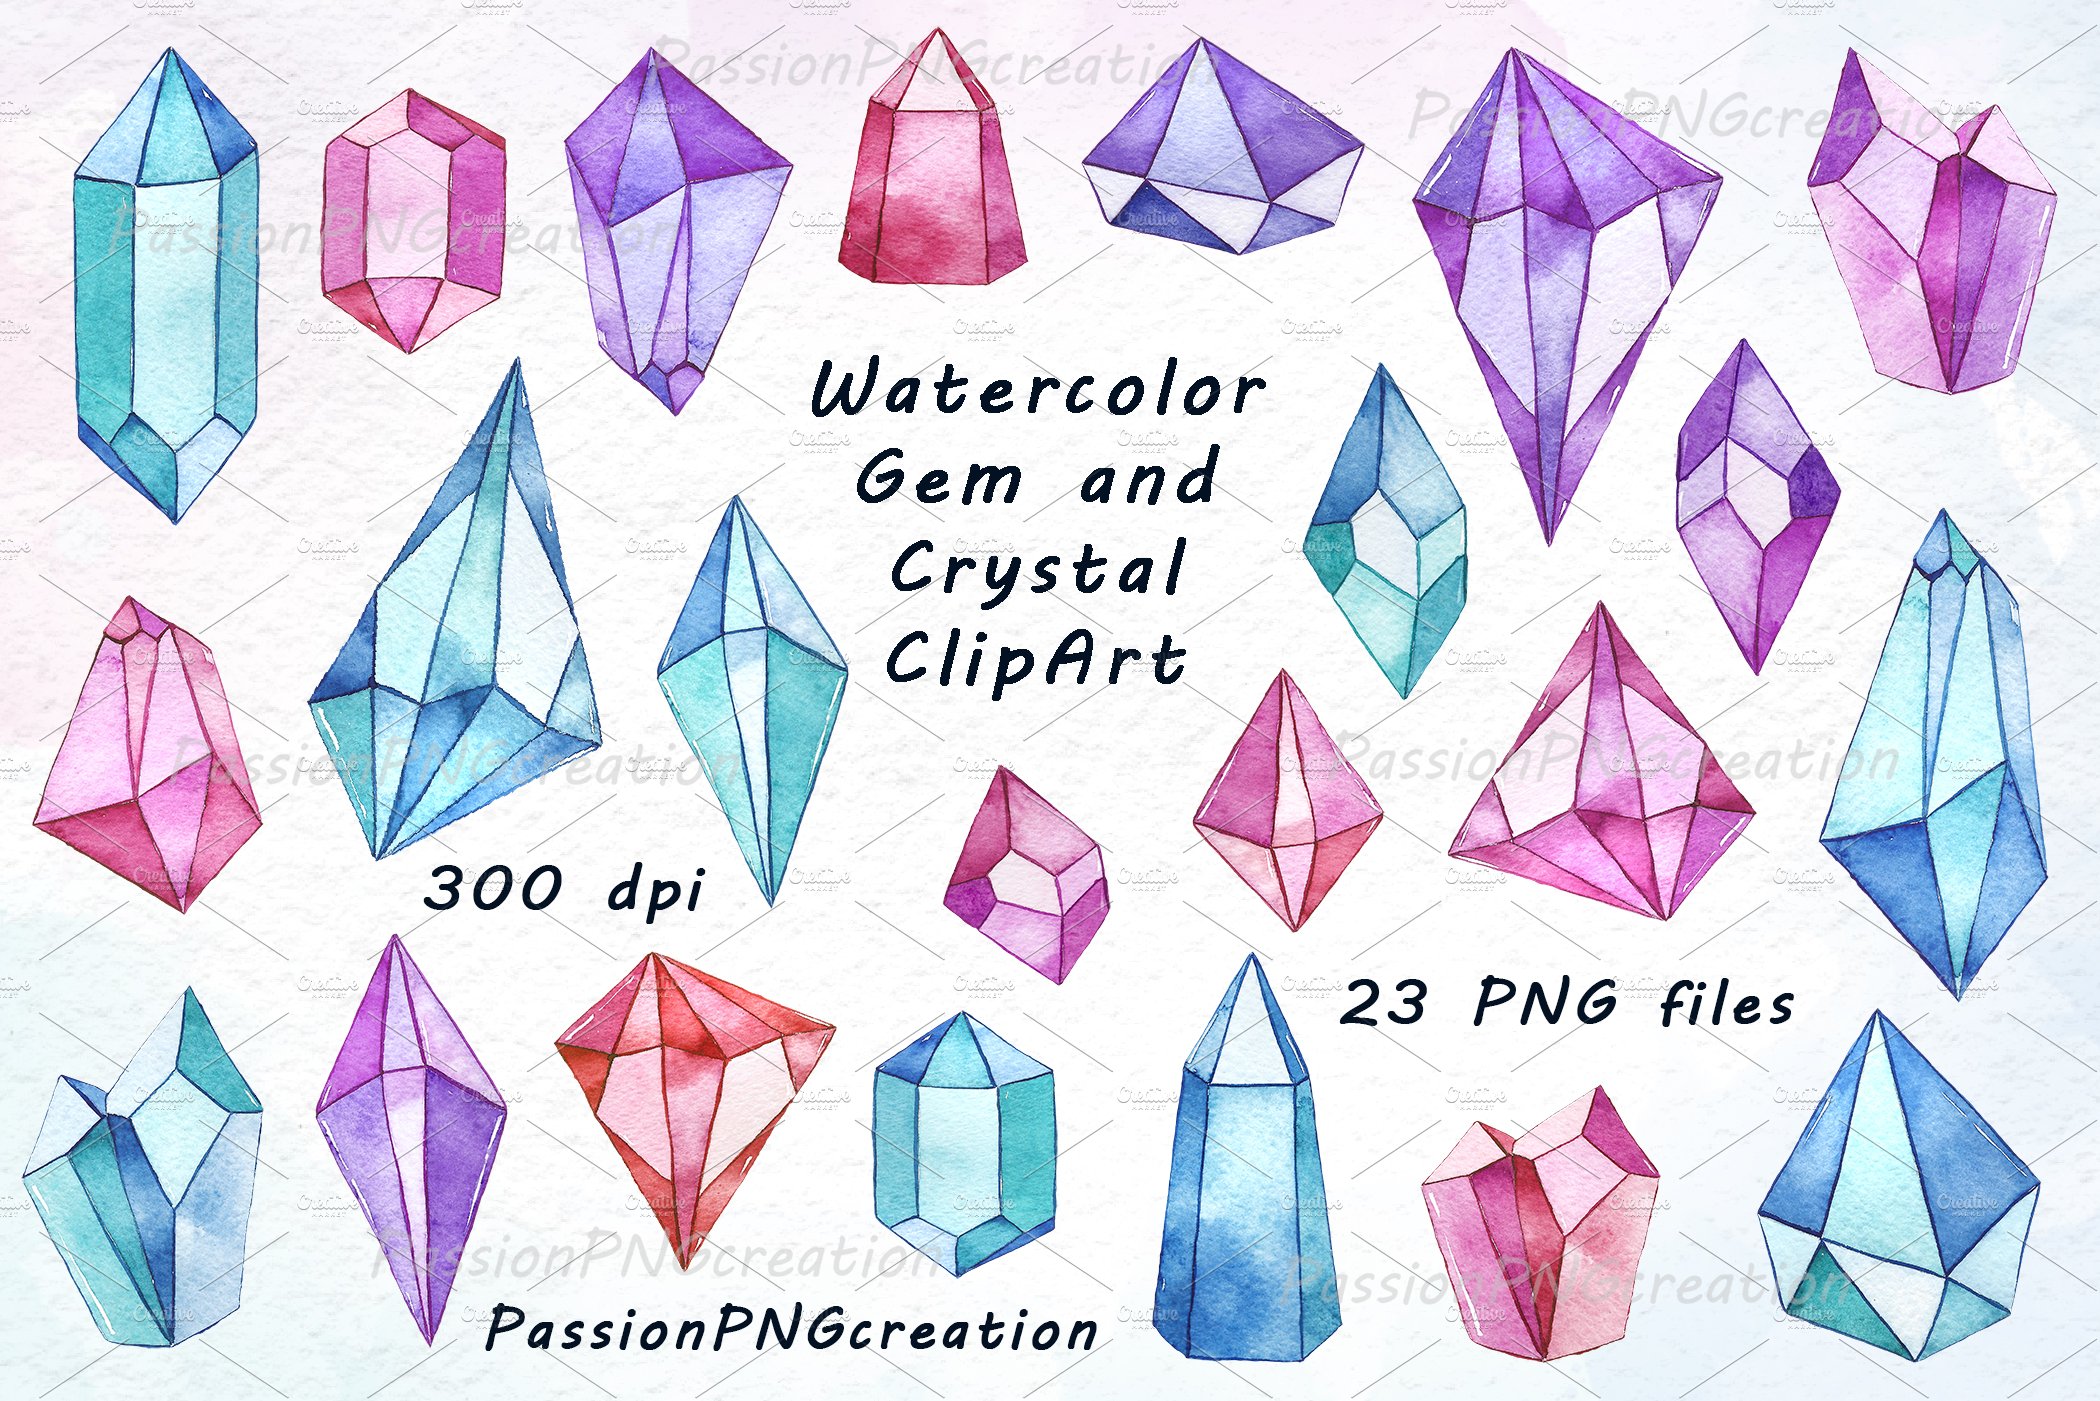 Watercolor Gems and Crystals Clipart cover image.